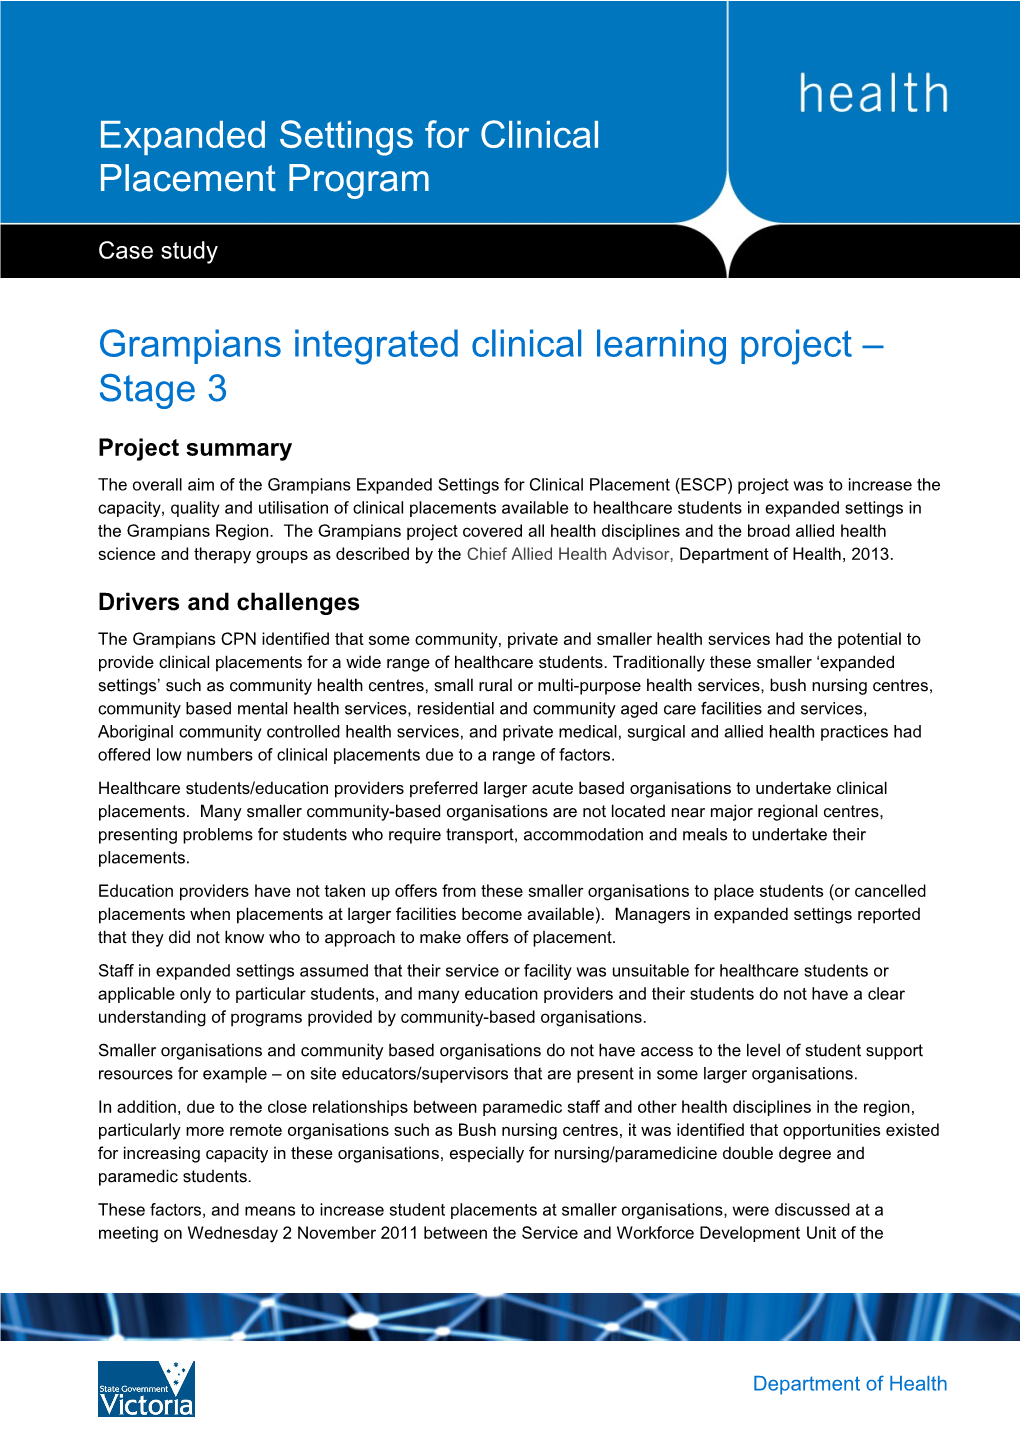 Grampians Integrated Clinical Learning Project Stage 3